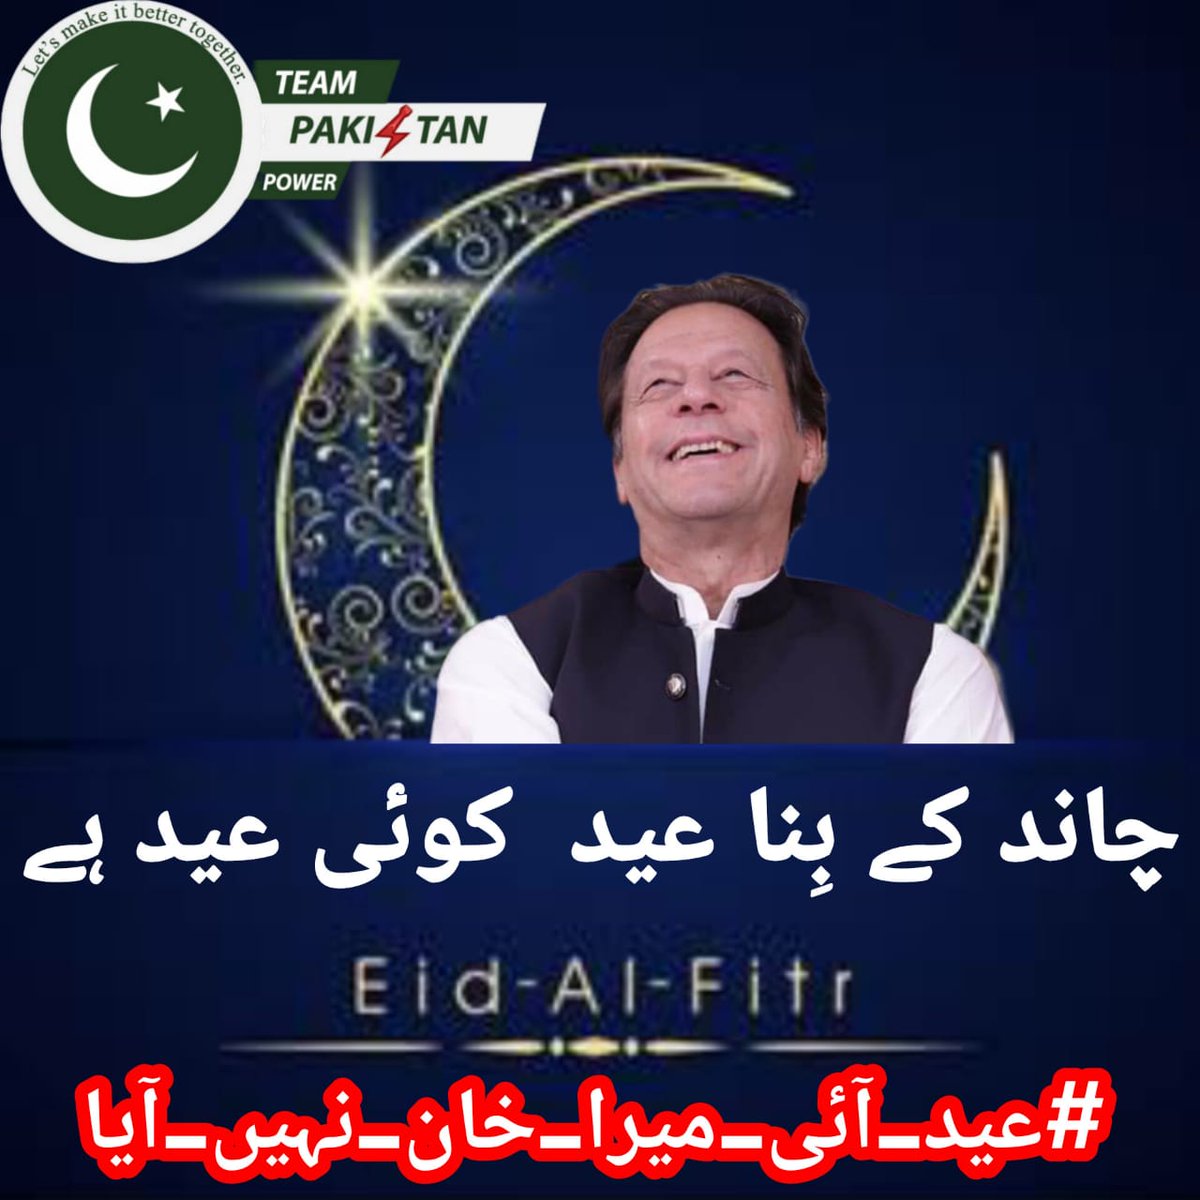 I @powerofjutt am sending to IK the wish Though barred by walls, your spirit remains free, Eid's message of unity echoes in solidarity. With each passing moment, may strength be your guide, Eid Mubarak, a beacon of hope by your side.' #عید_آئی_میرا_خان_نہیں_آیا @TeamPakPower…